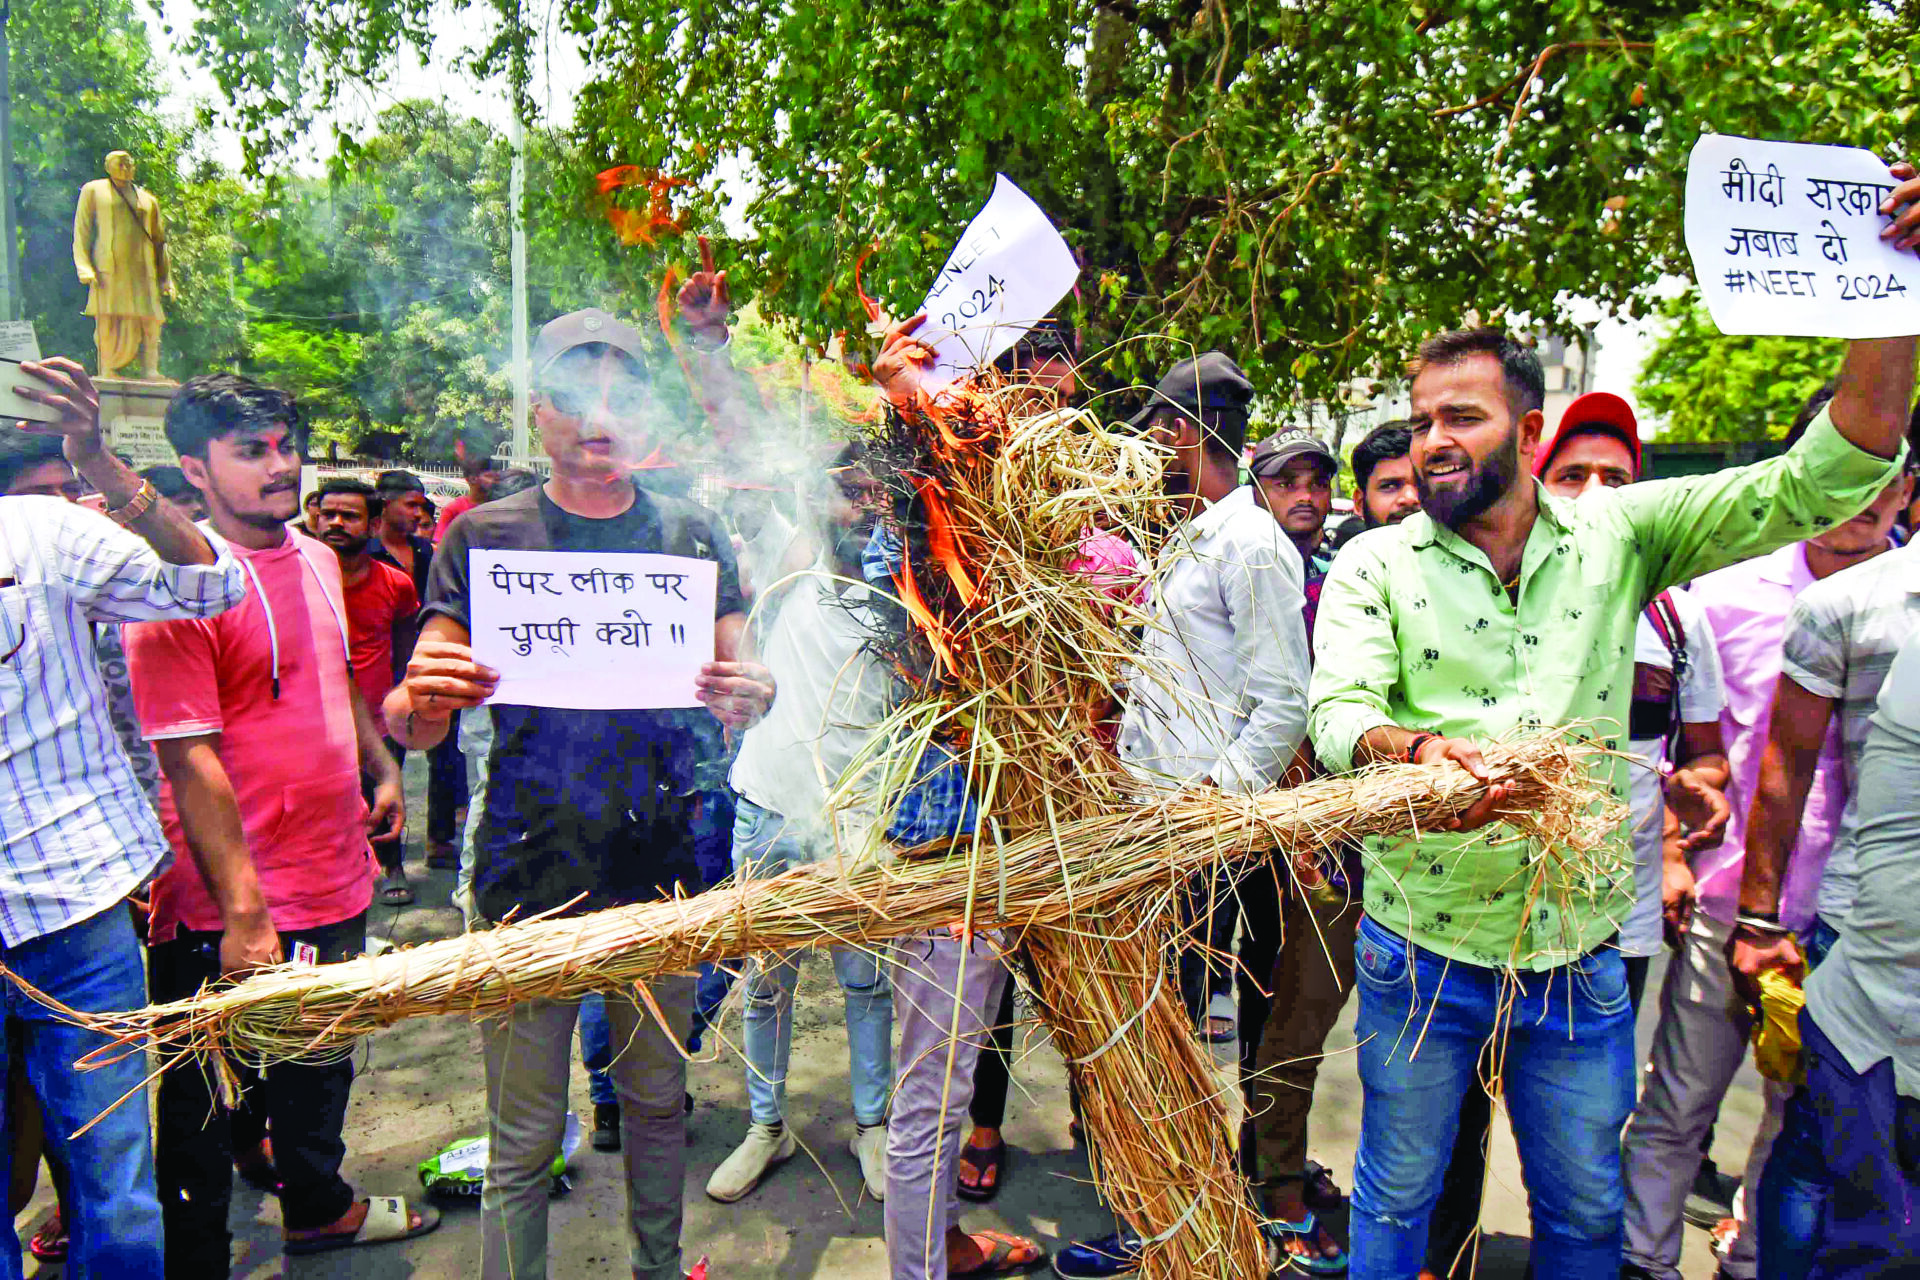 Students burn an effigy during their protest against the NEET UG entrance exam paper leak, in Patna on Saturday. ANI